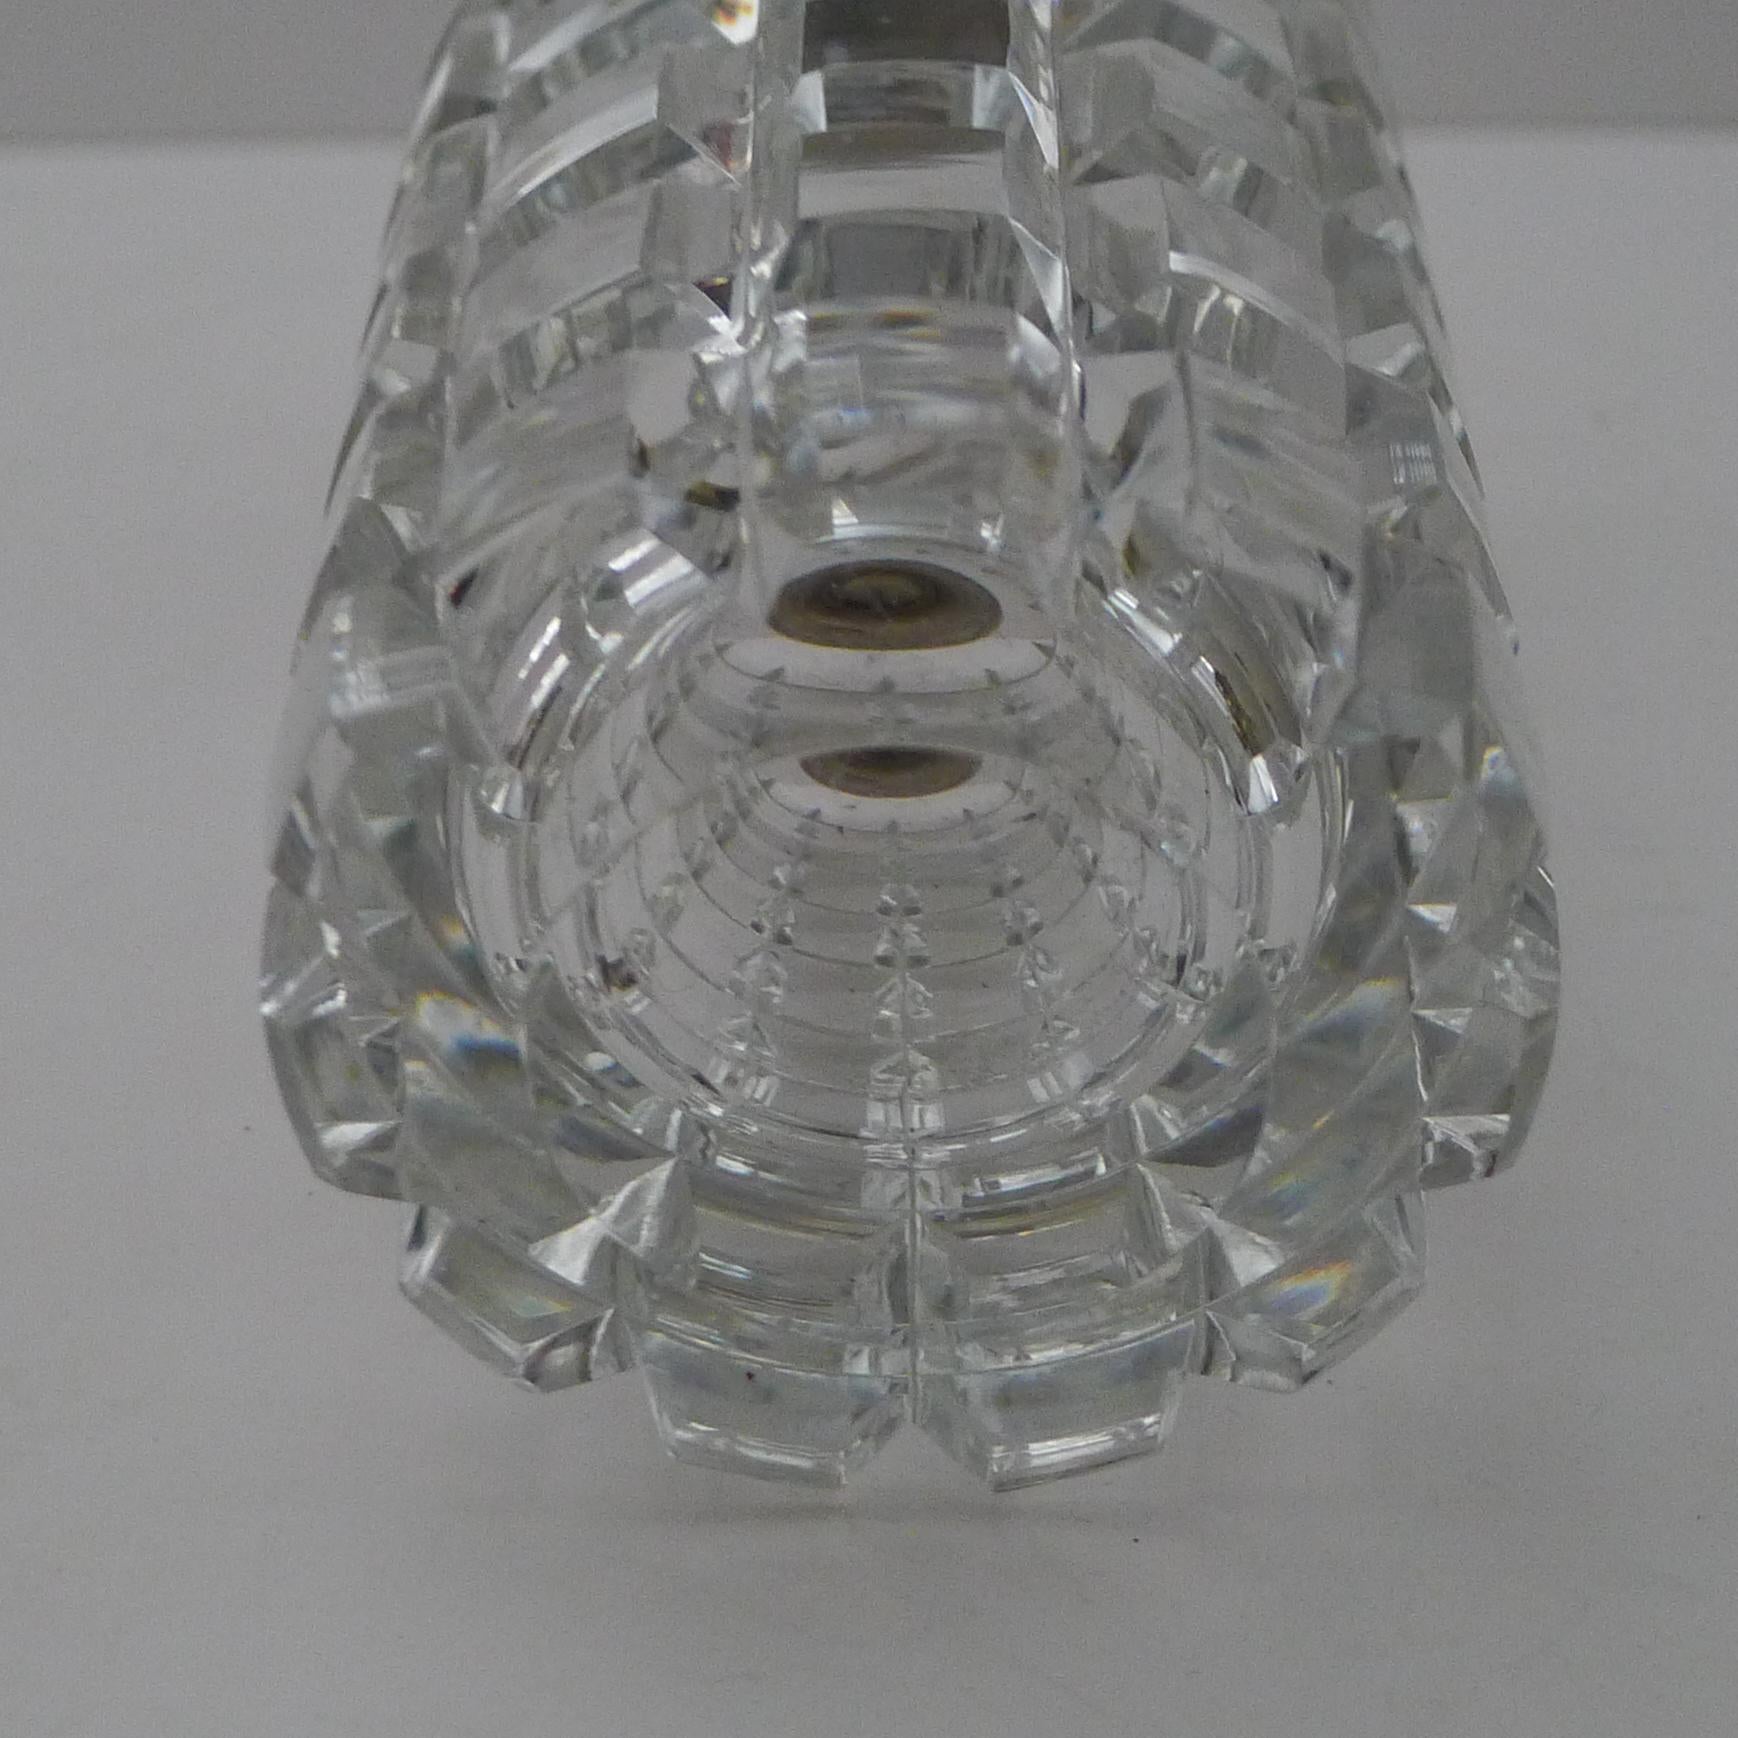 Continental Sterling Silver Topped Cut Crystal Shaker For Sale 2